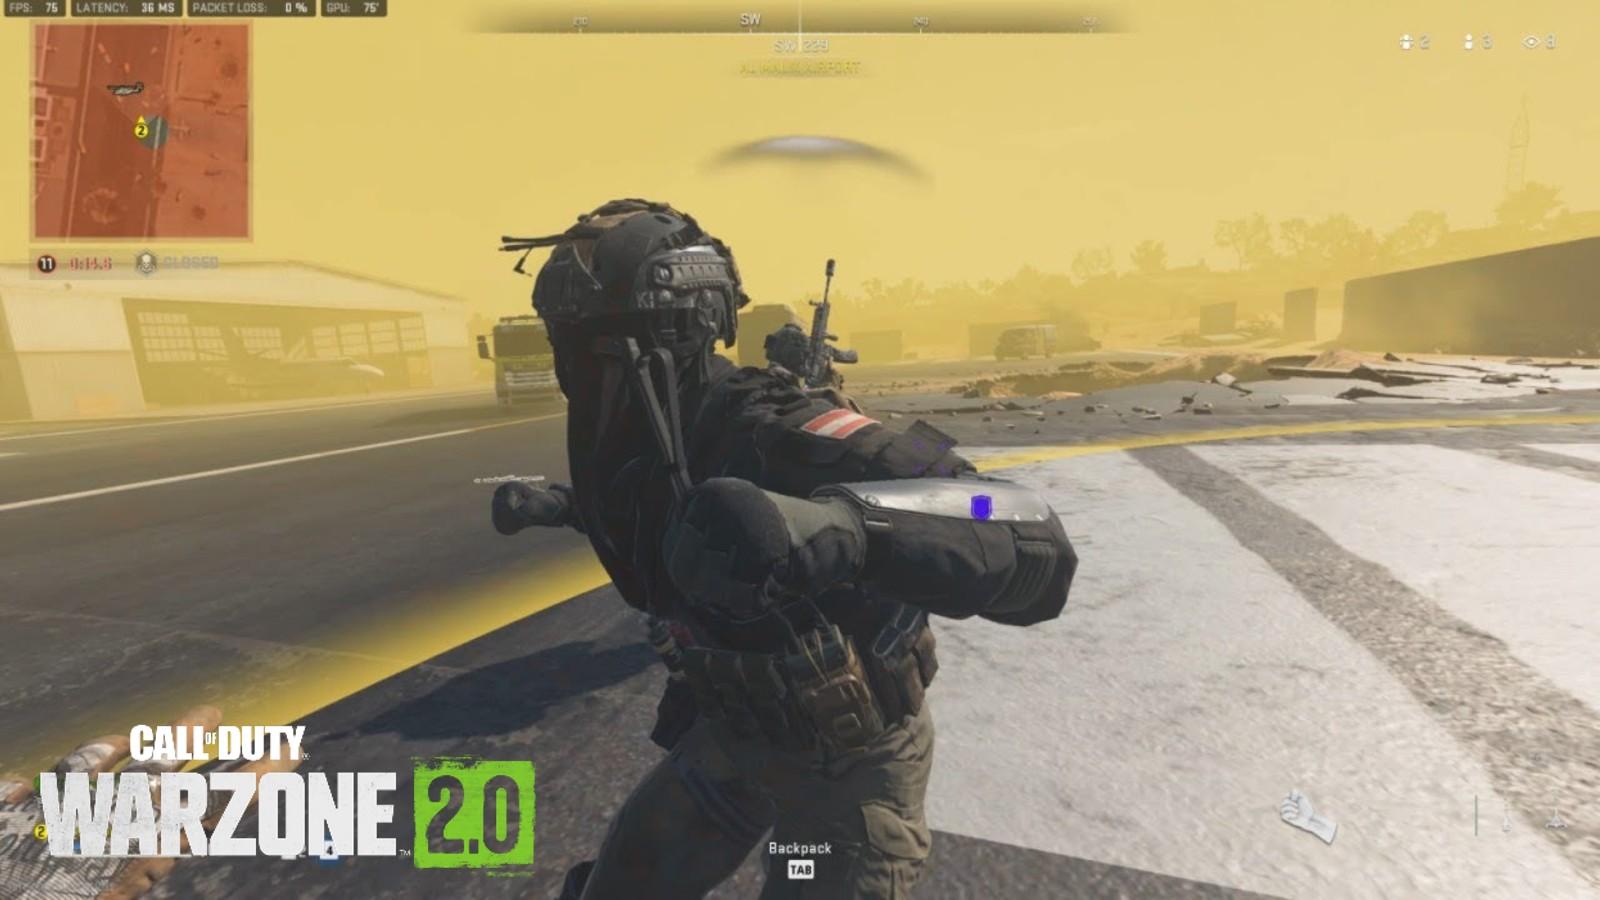 An operator punching in Warzone 2